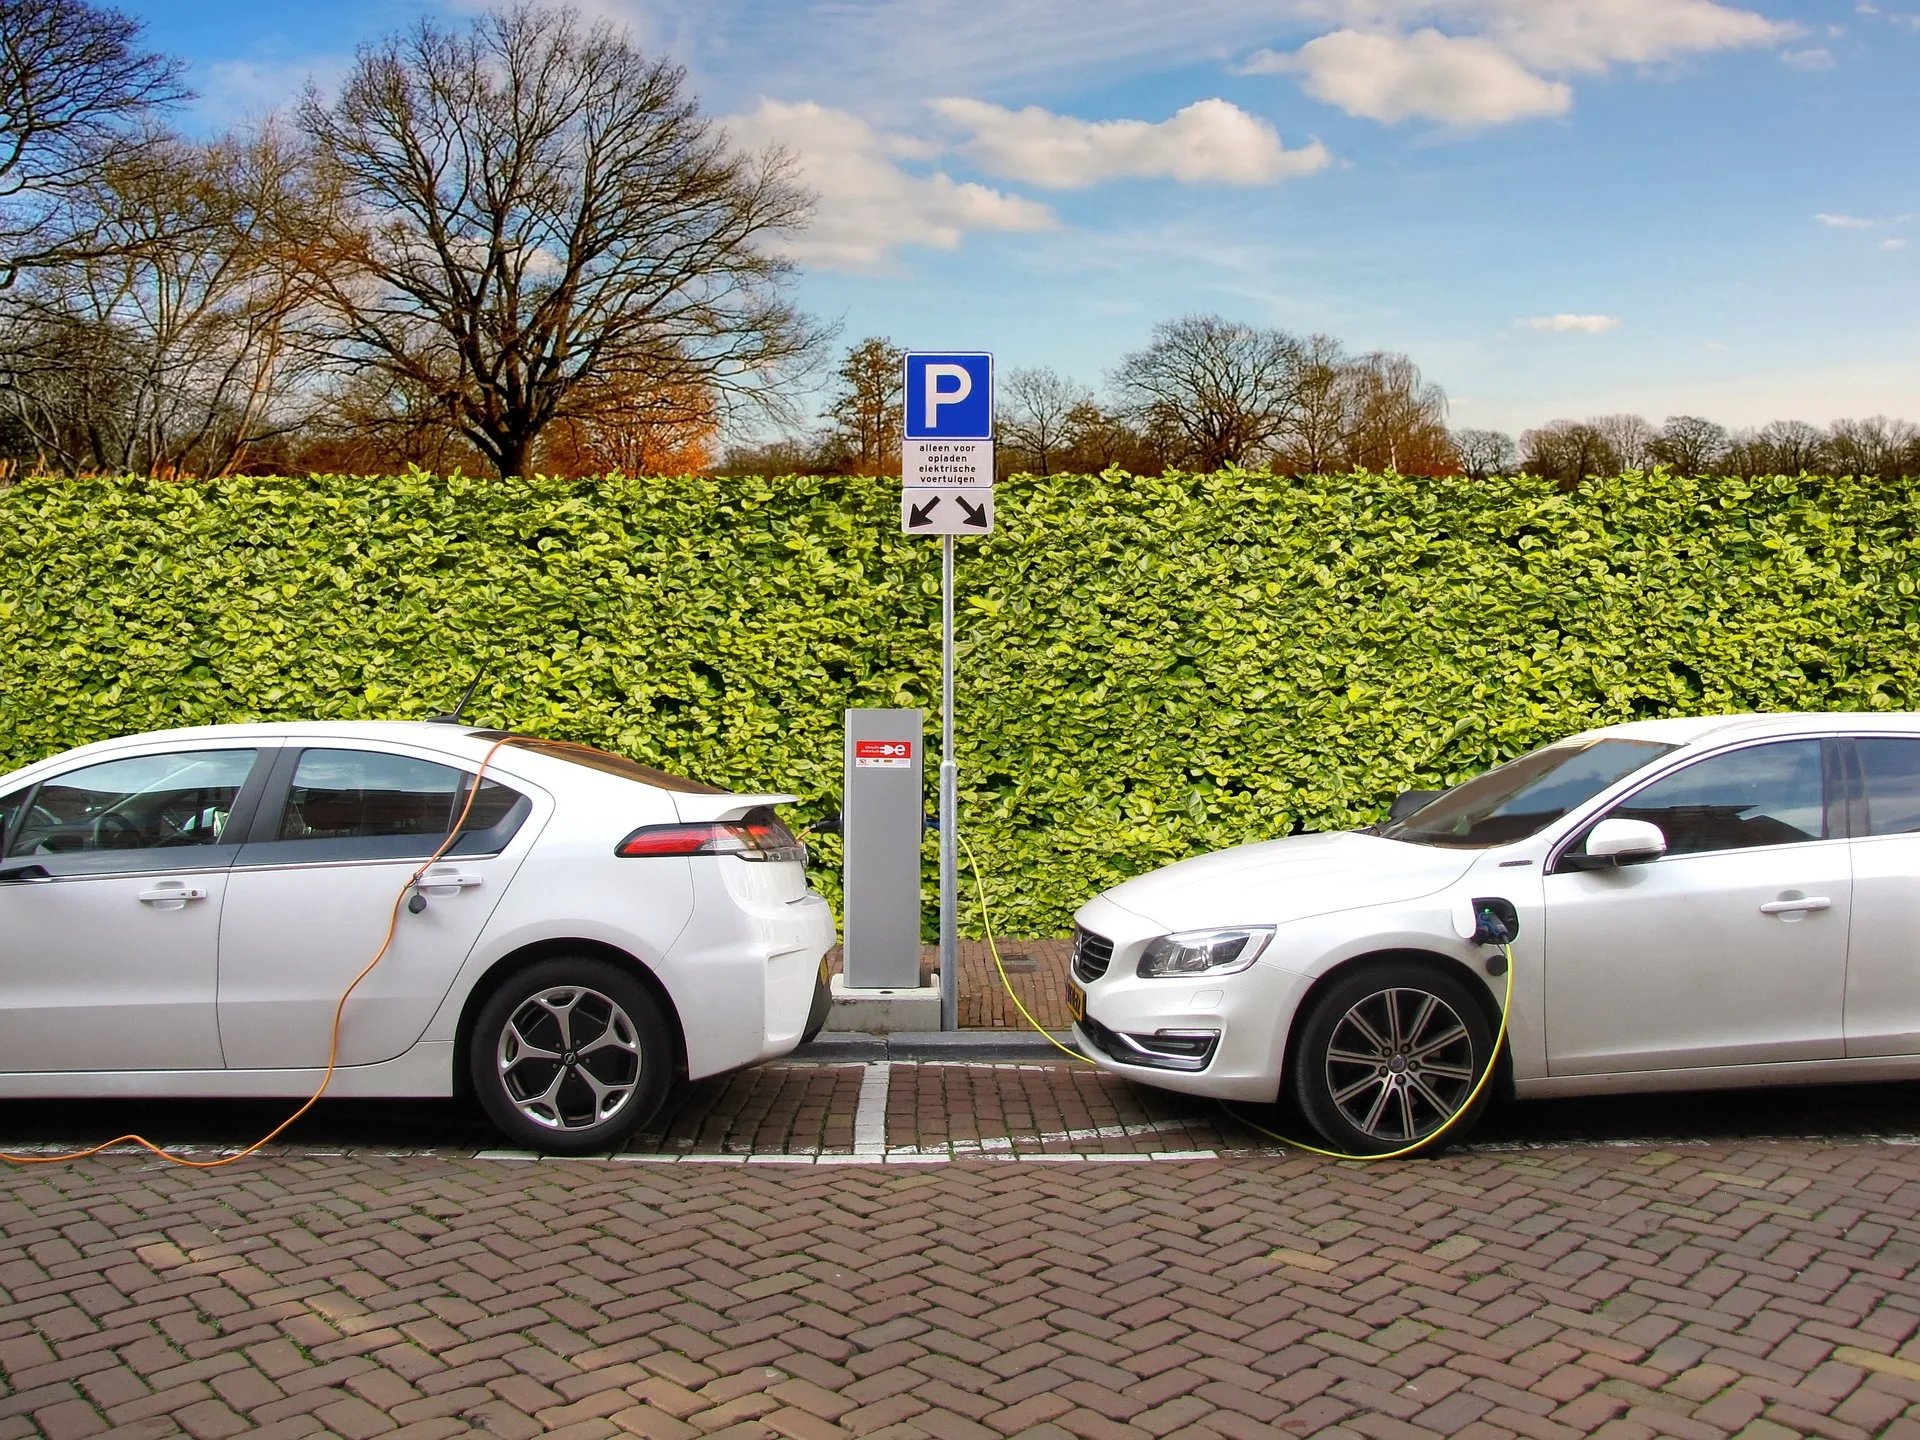 If Gasoline Cars Are a Health Risk, Are Electric Cars the Solution?